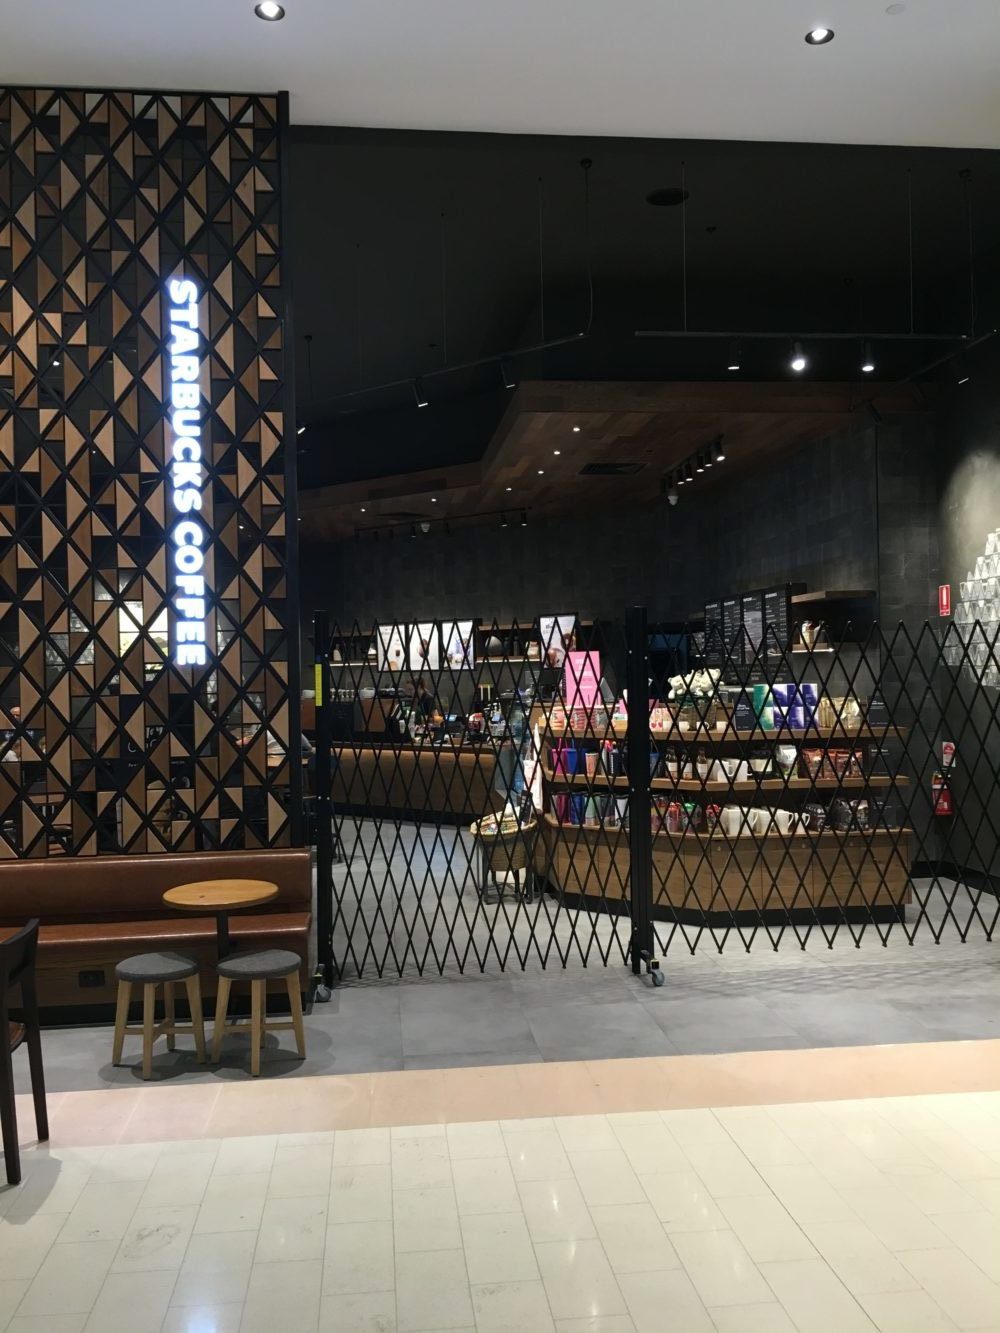 ATDC Installs its Portable Barricades for Starbucks in Melbourne